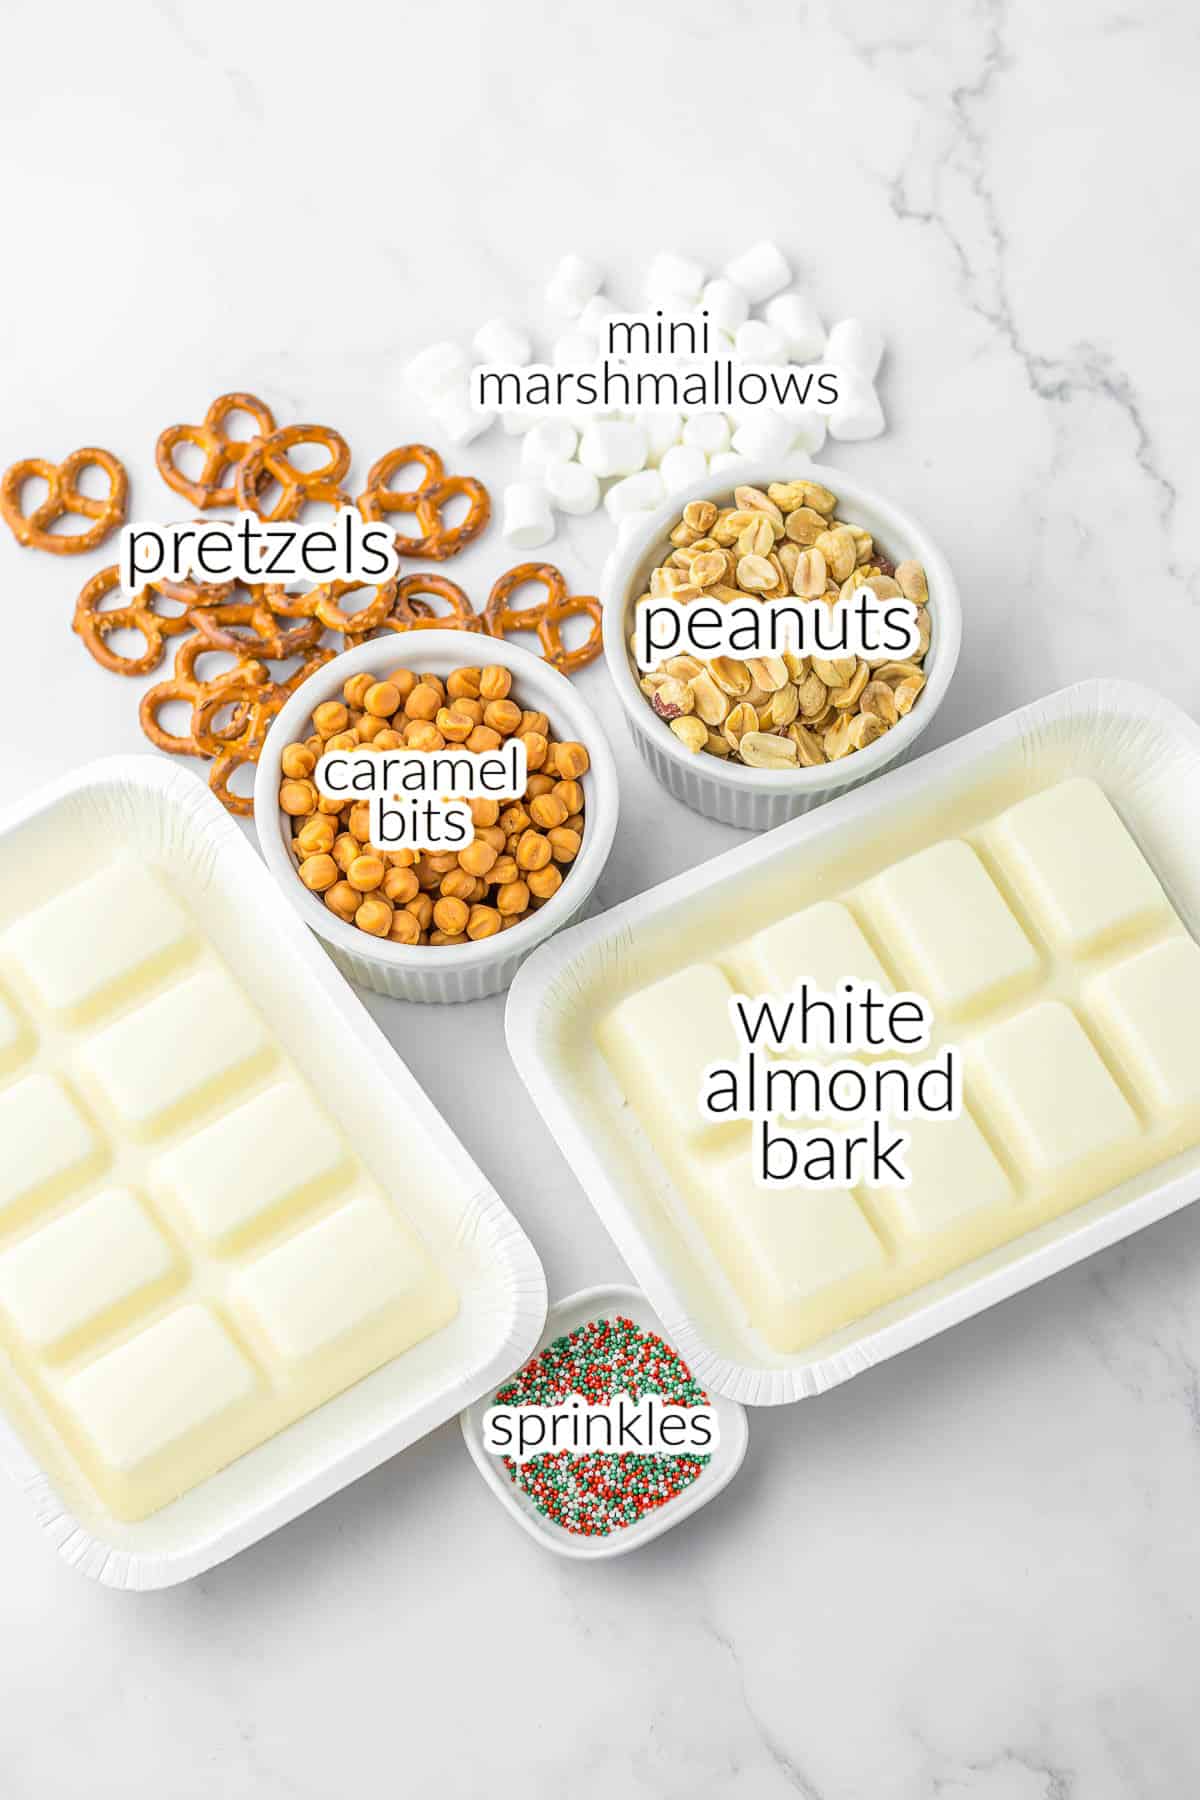 Ingredients for crockpot candy - mini marshmallows, white almond bark, caramel bits, sprinkles, pretzels and peanuts.